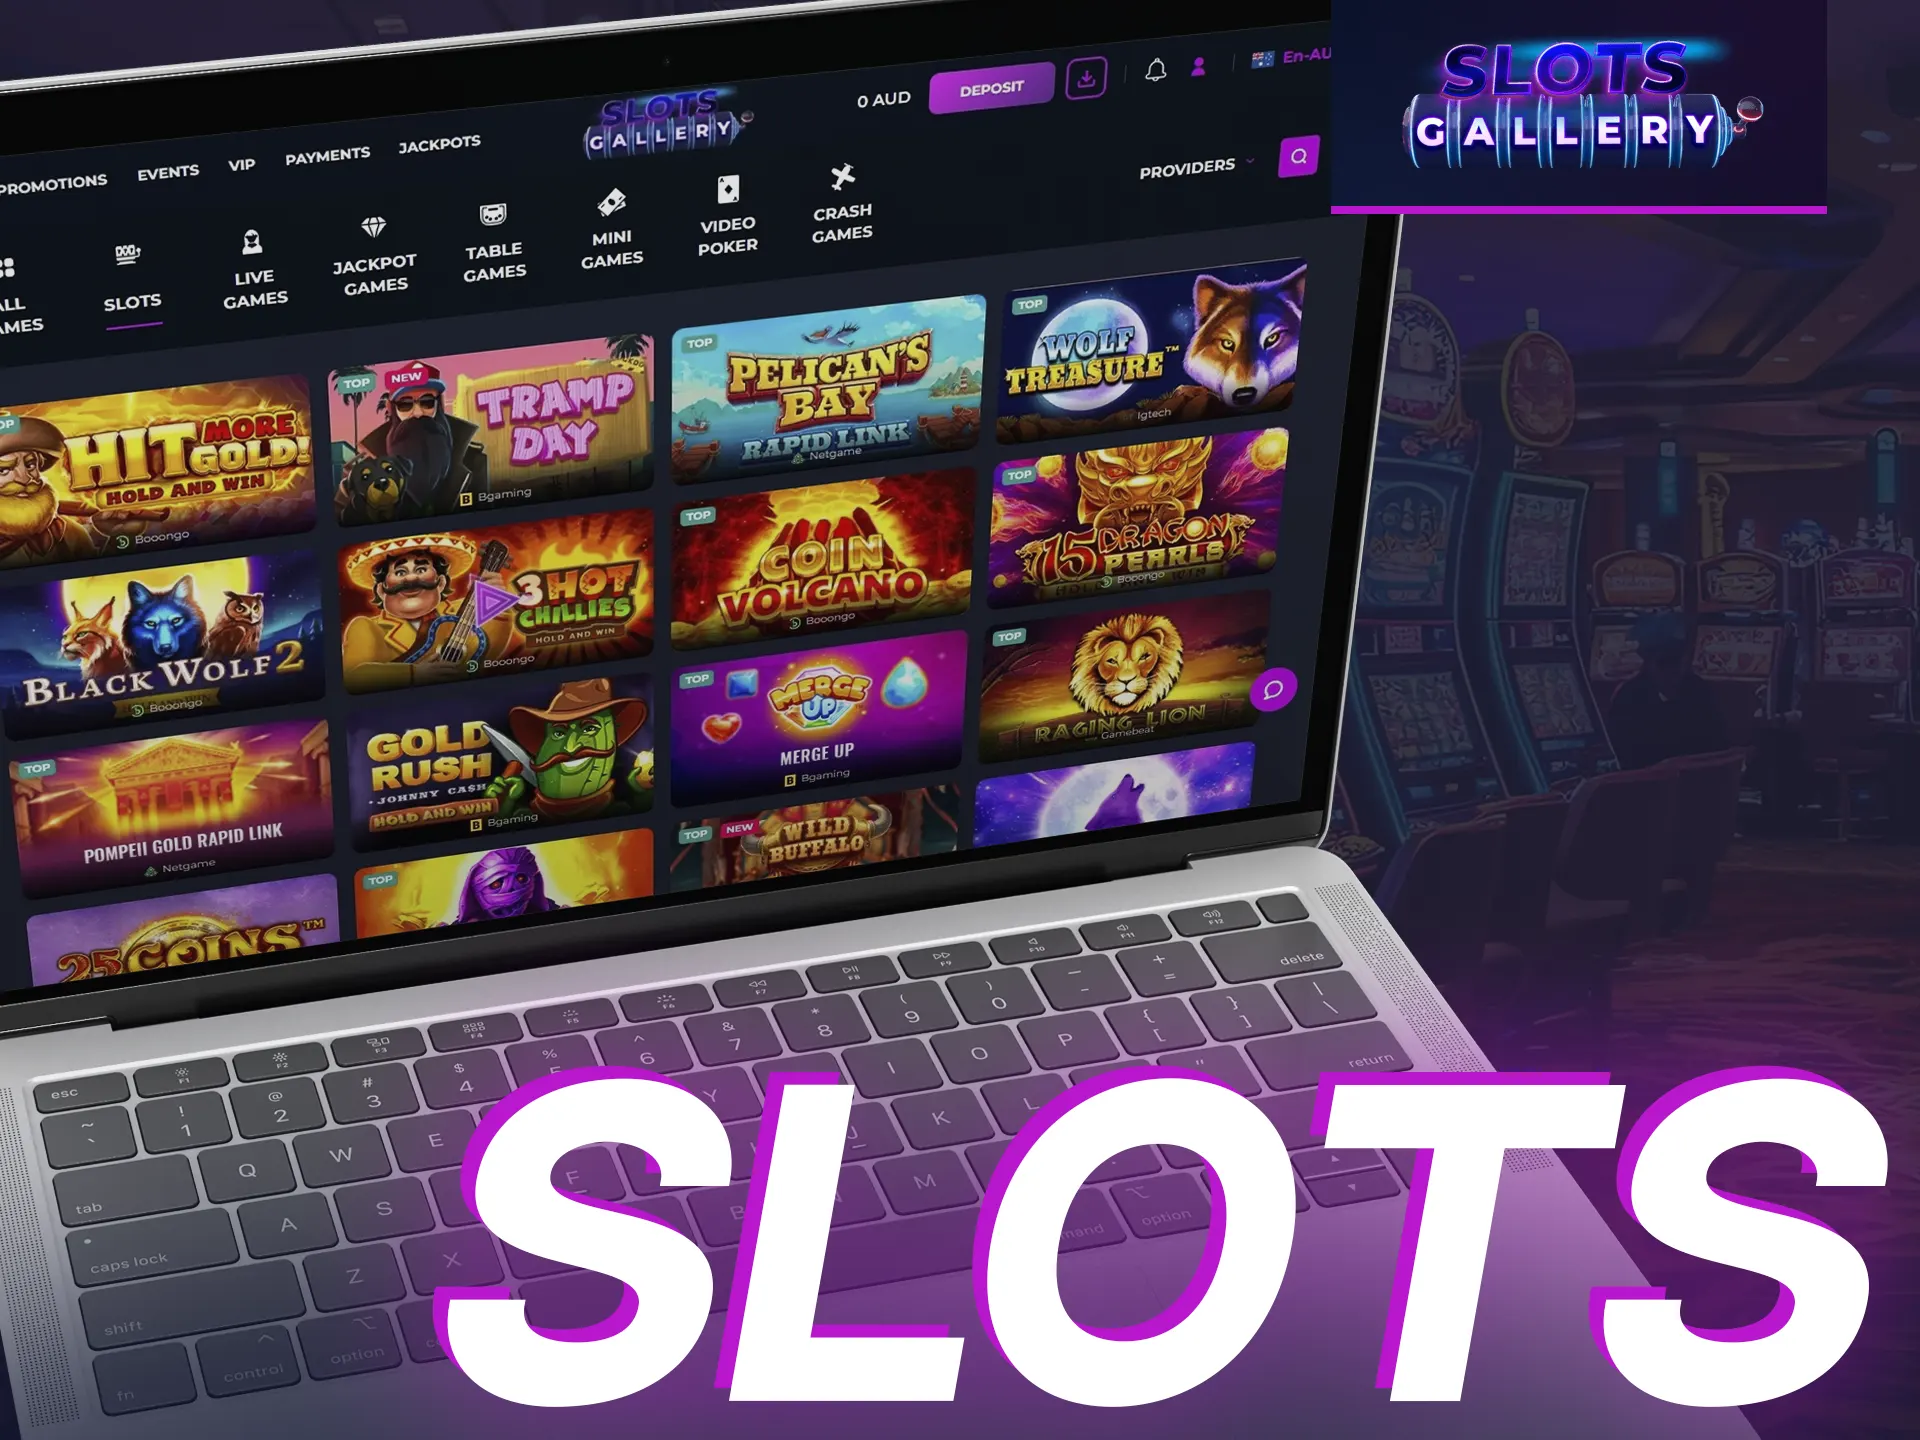 Play Slots Gallery's variety of colorful, fast-paced slot machines.